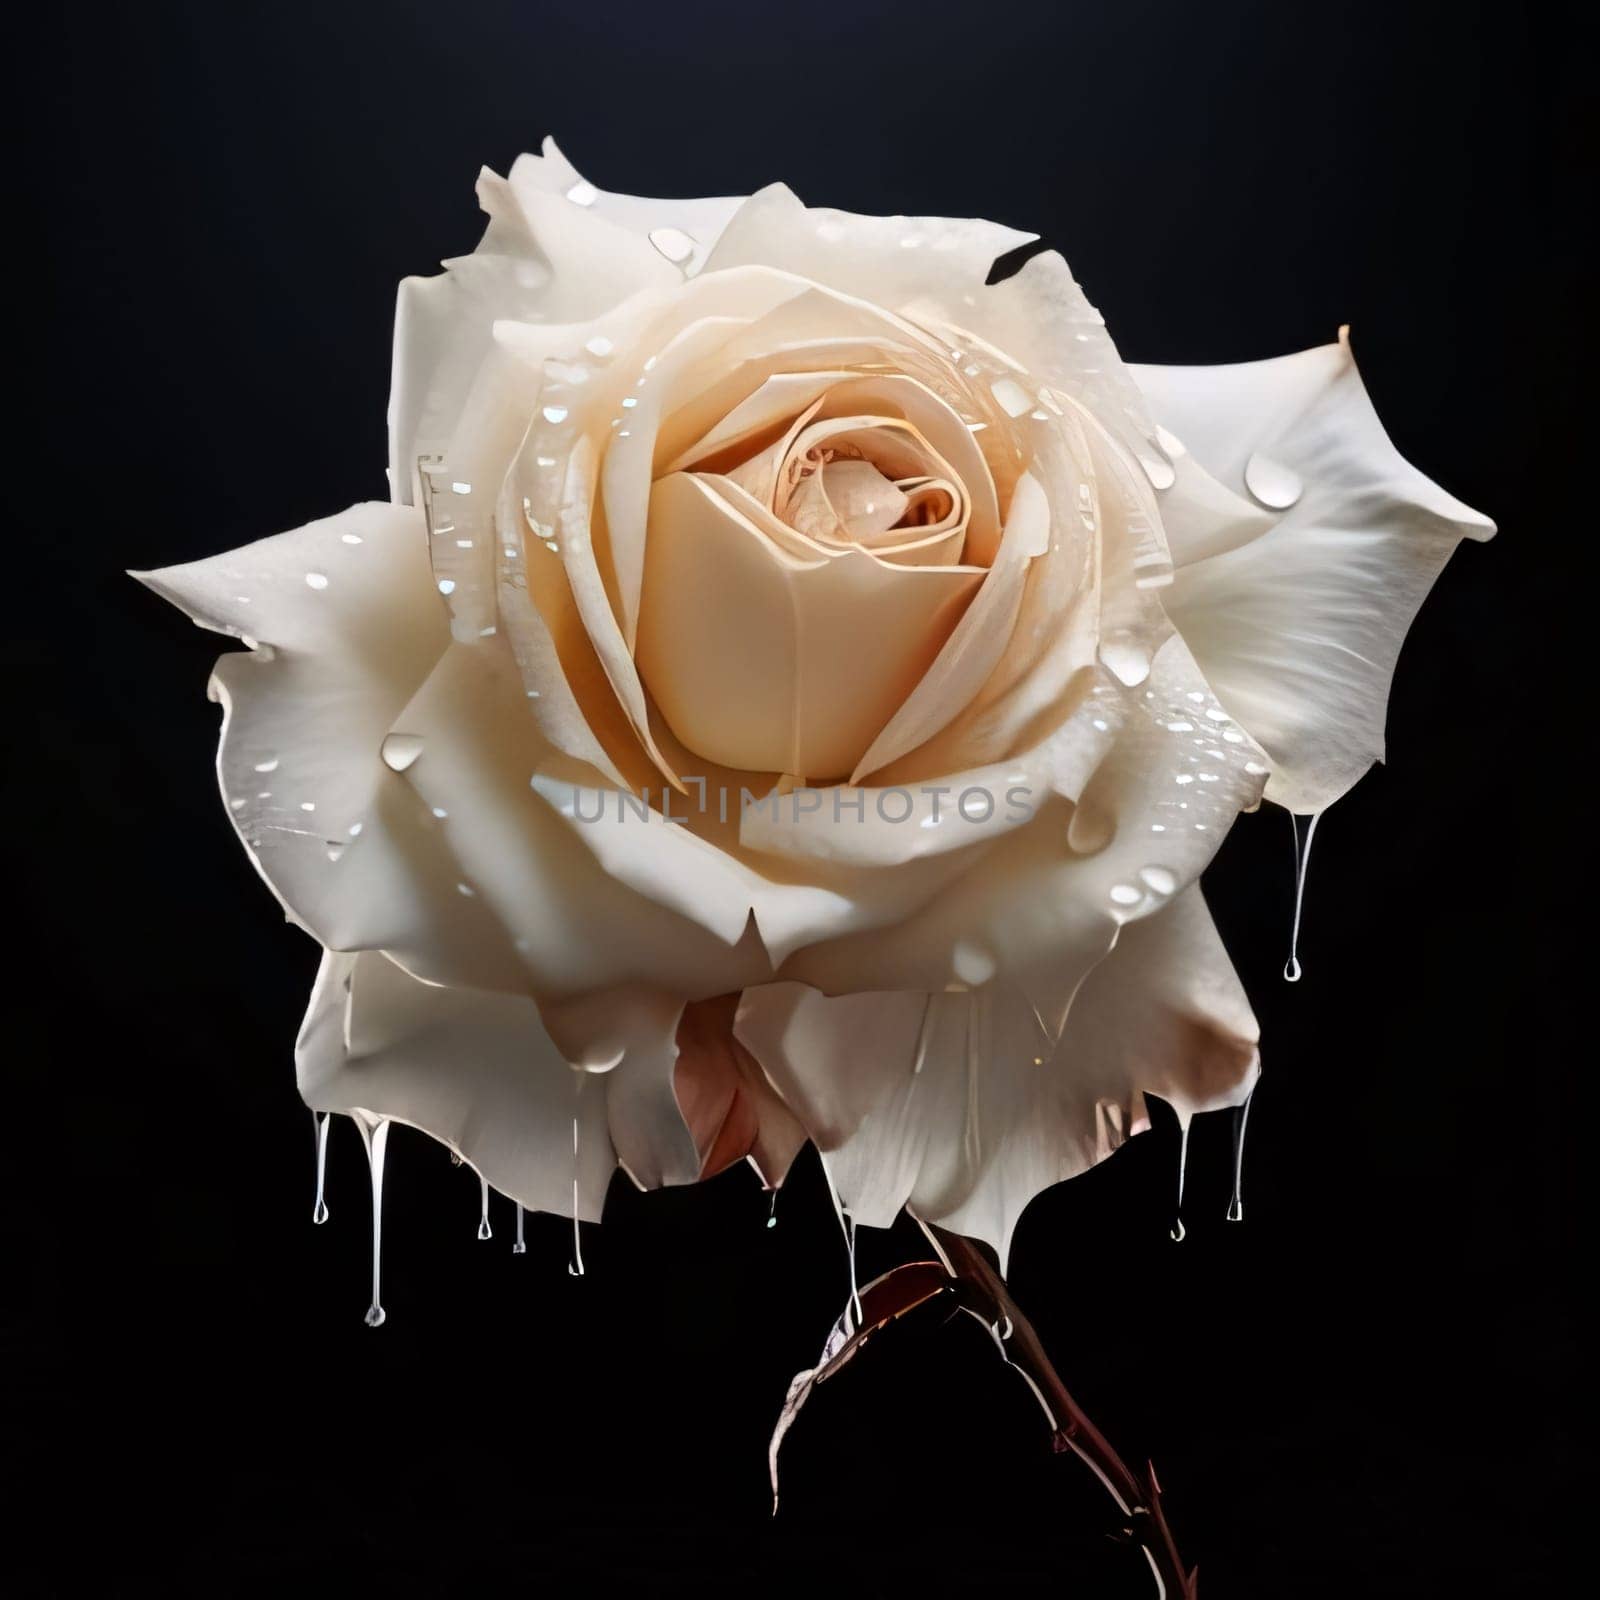 White rose flower isolated on black background. Flowering flowers, a symbol of spring, new life. A joyful time of nature waking up to life.